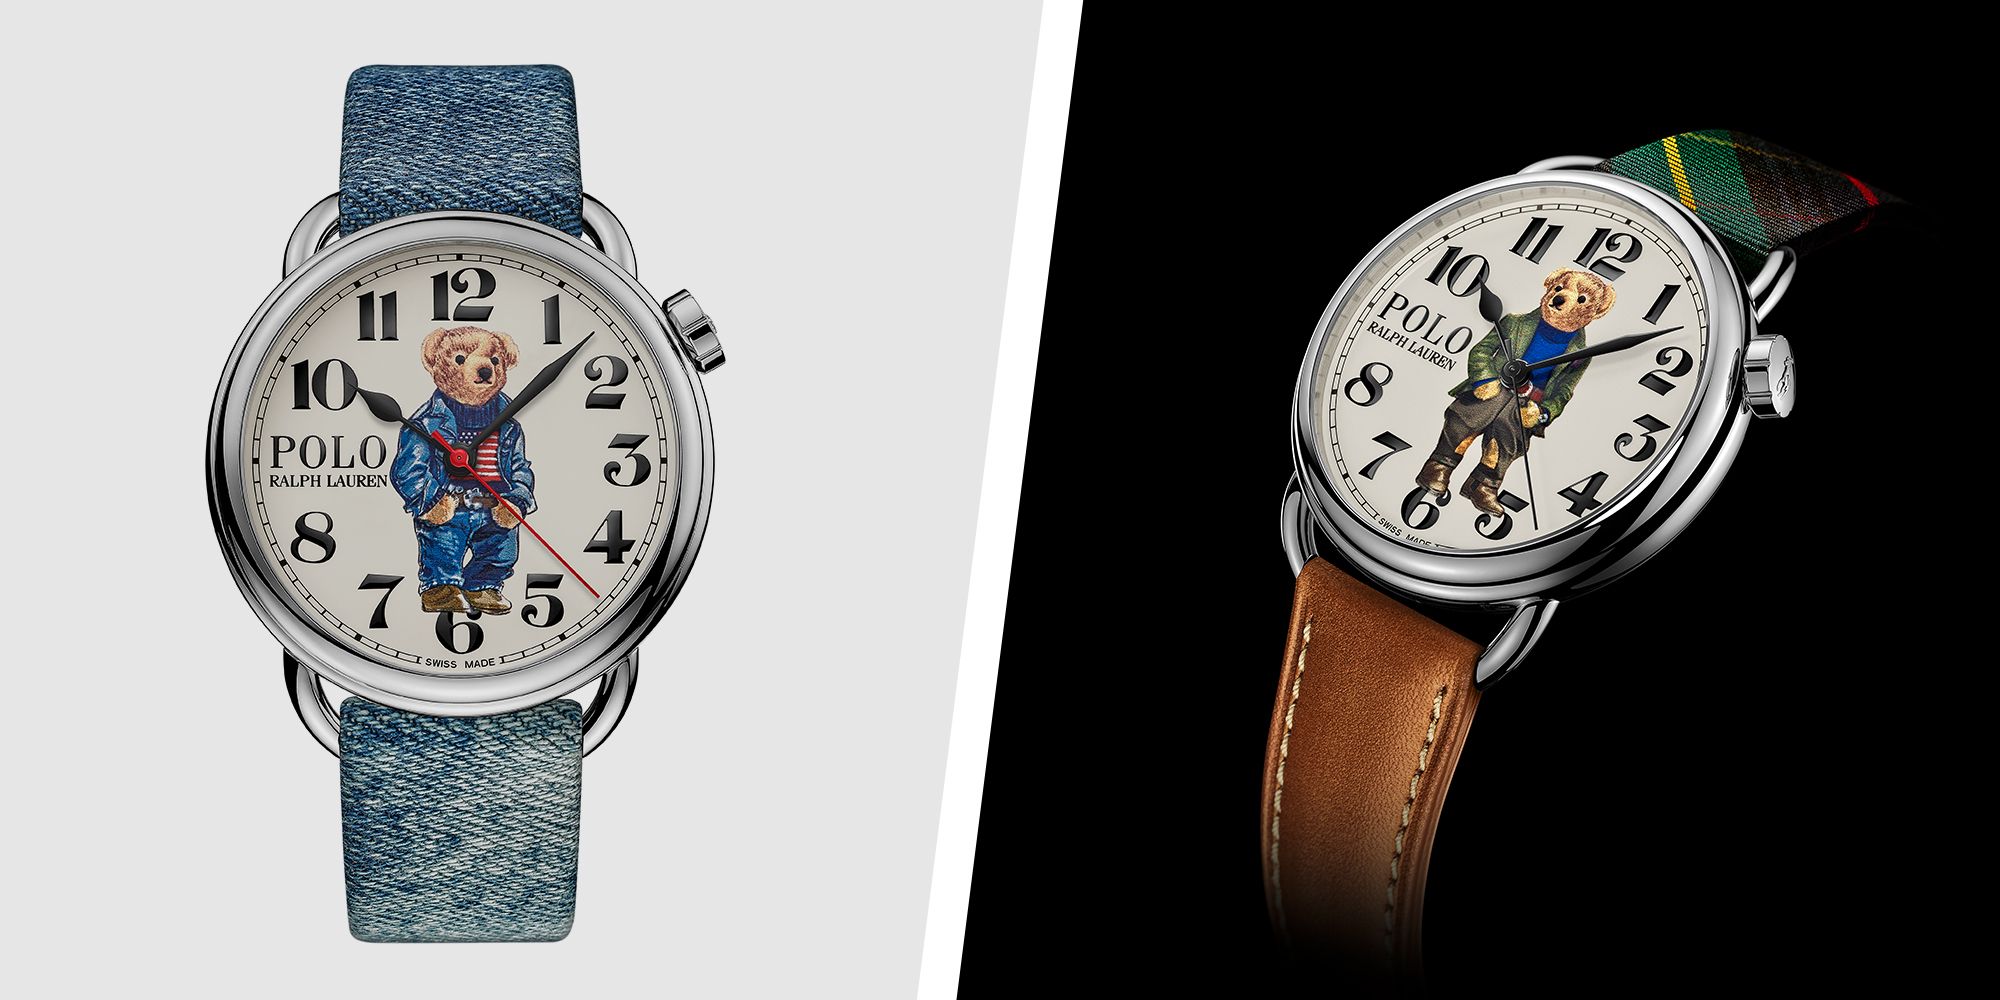 The 2022 Ralph Lauren Polo Watch Collection - Hands, Specs & Price